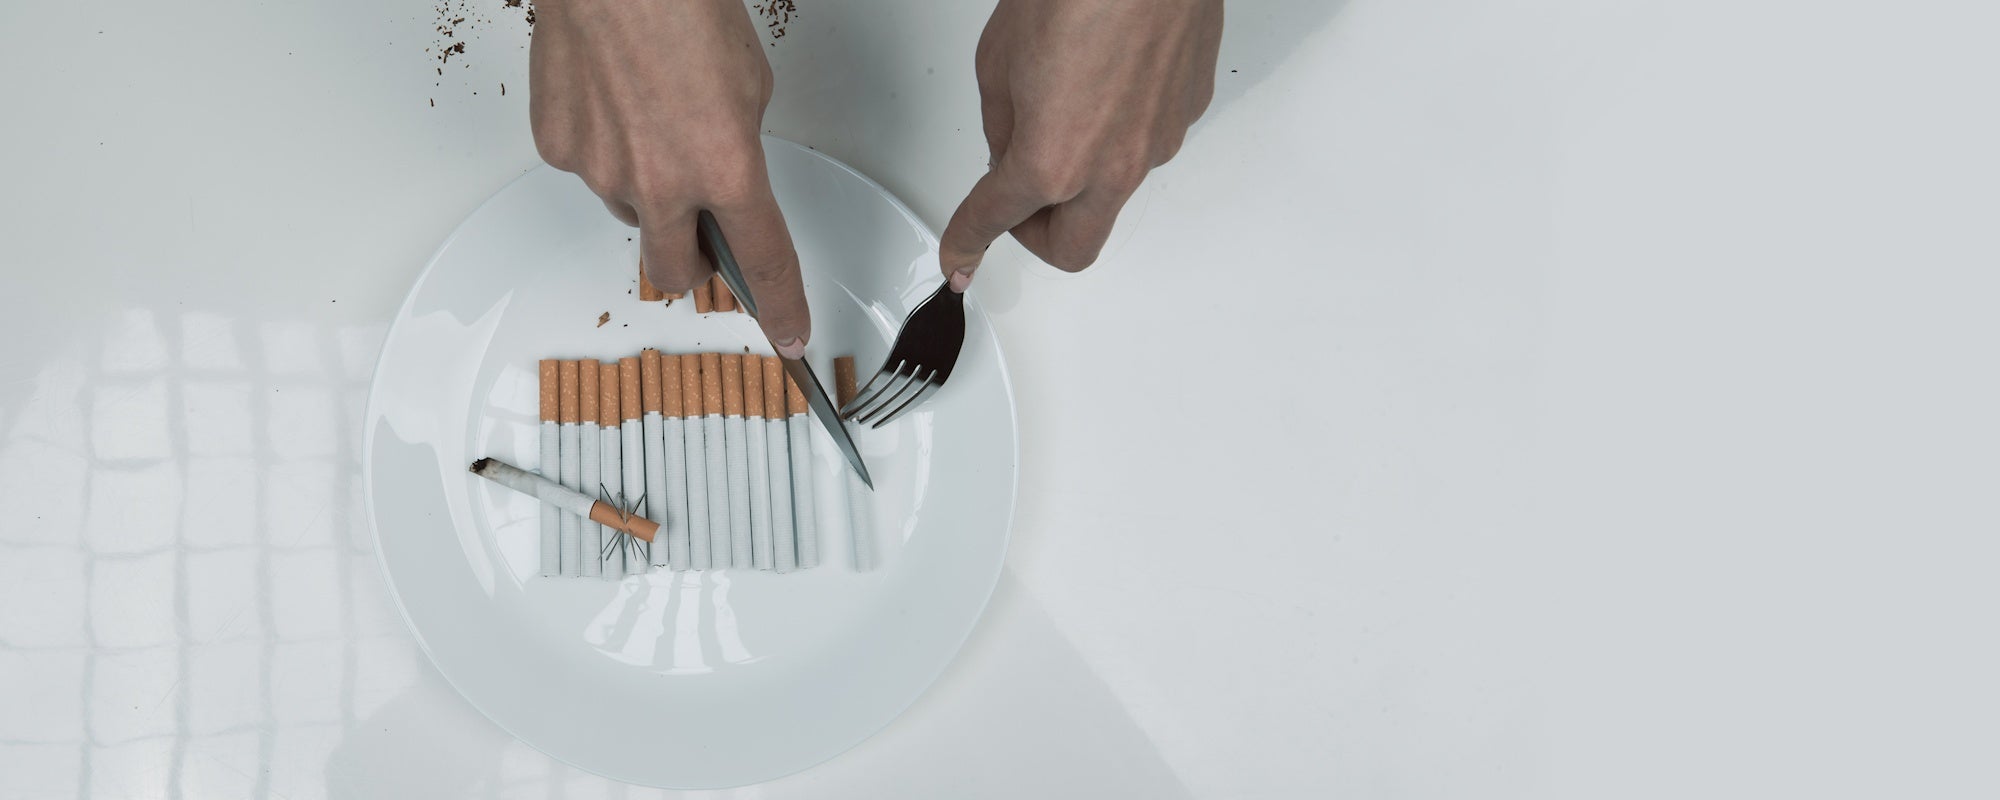 Person cutting cigarettes on a plate